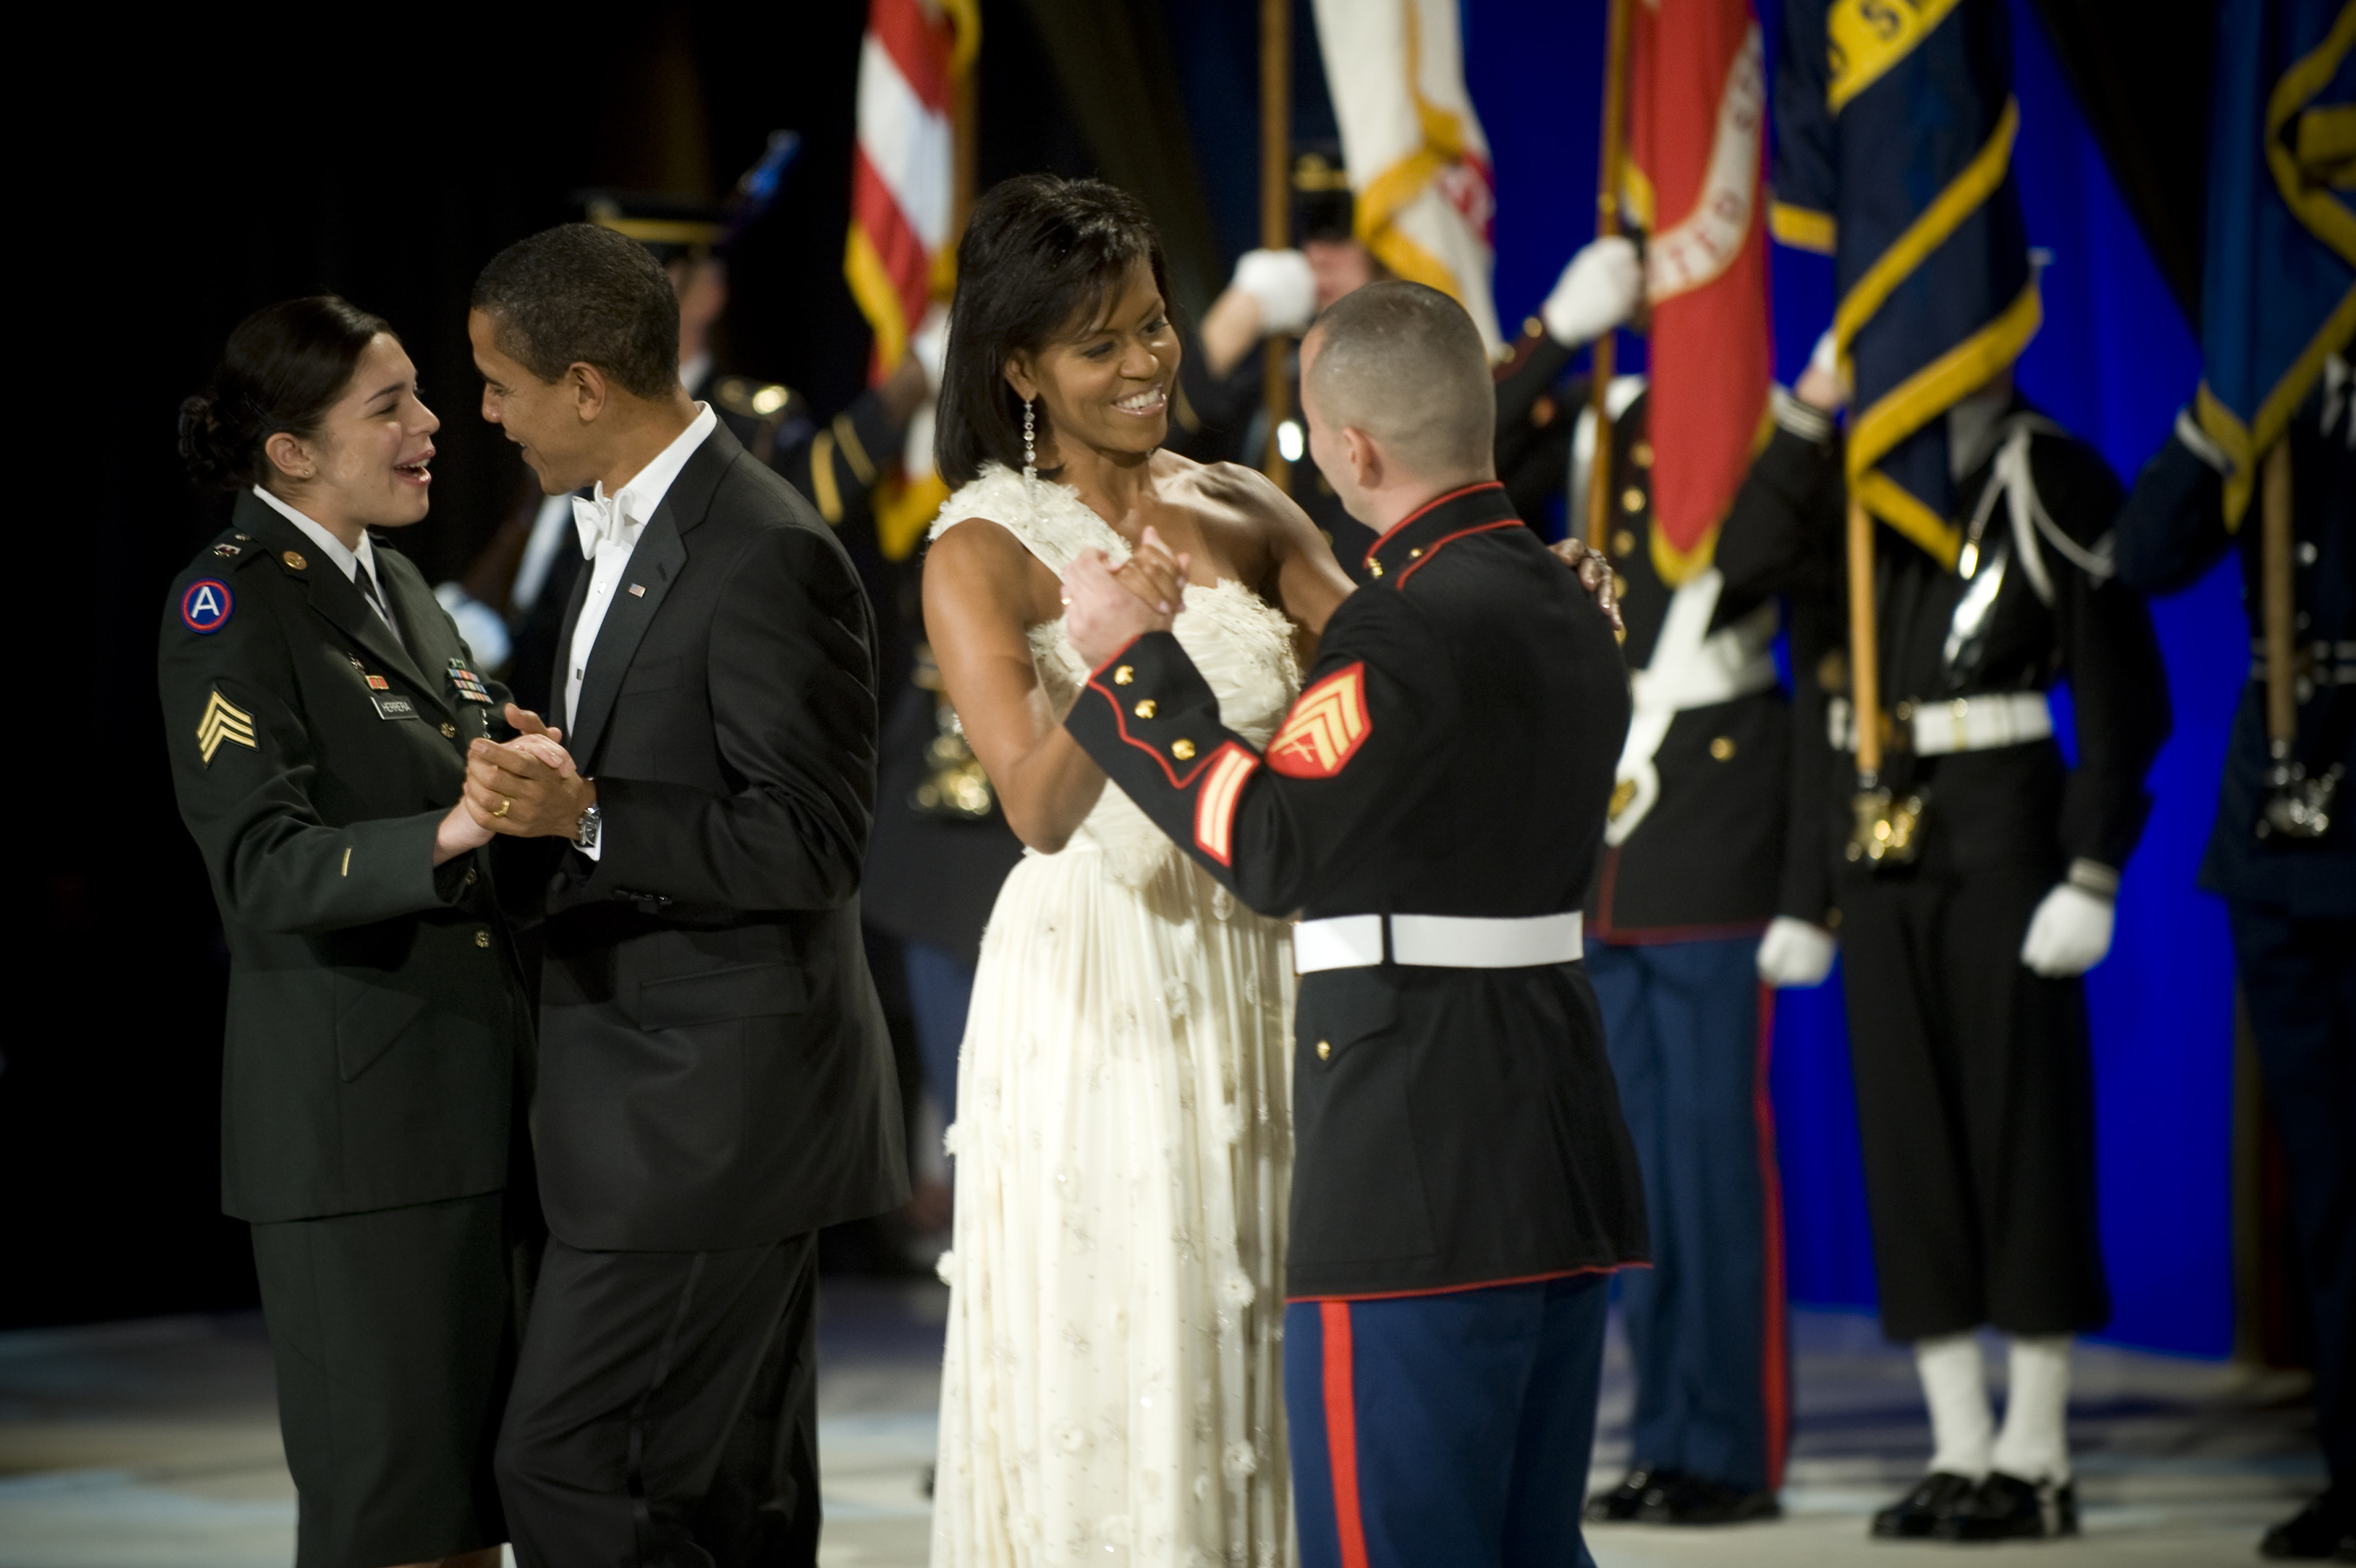 Obamas dance with service members at CinC's Ball 1-20-09 hires 090120-N-0696M-770